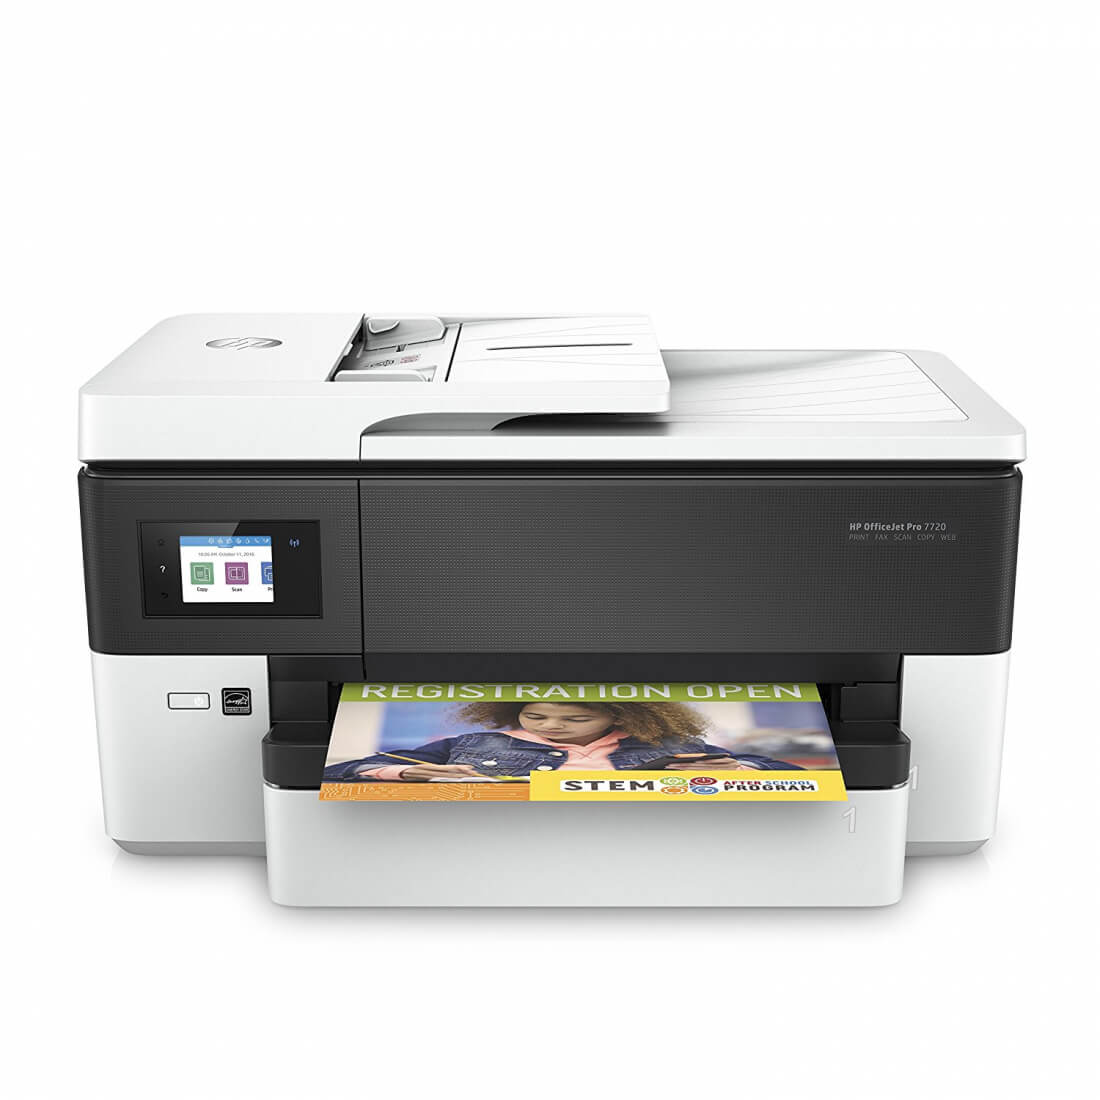 HP OfficeJet Pro 7720 All-in-One Series